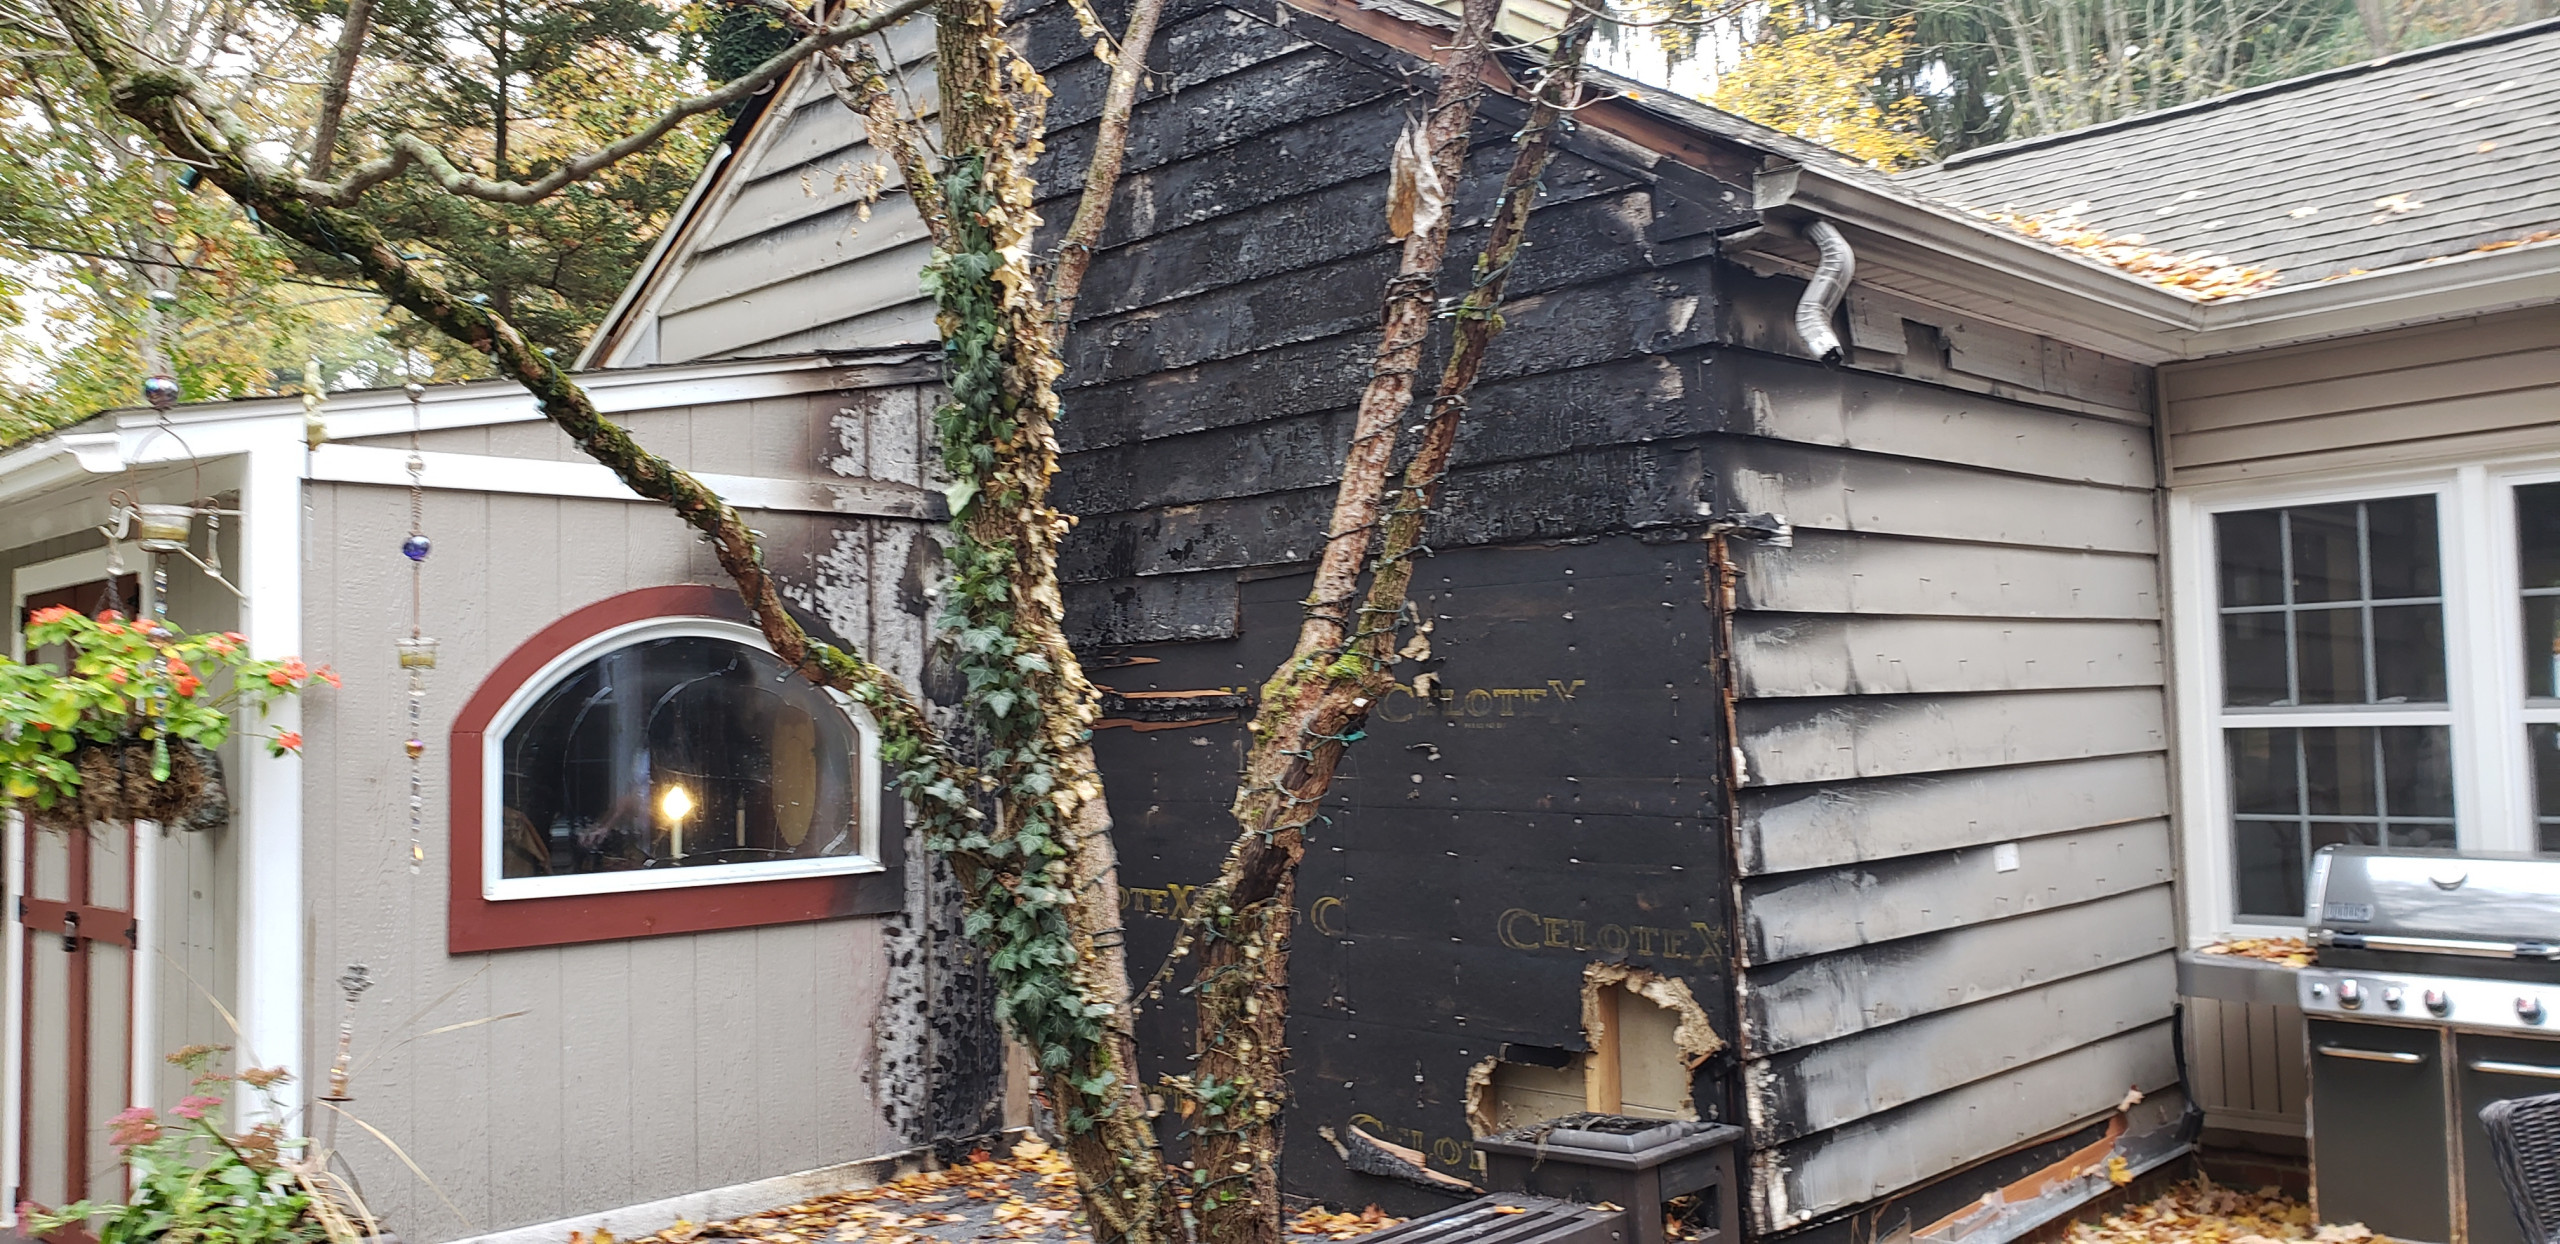 Expert Tips for Repairing Fire Damage